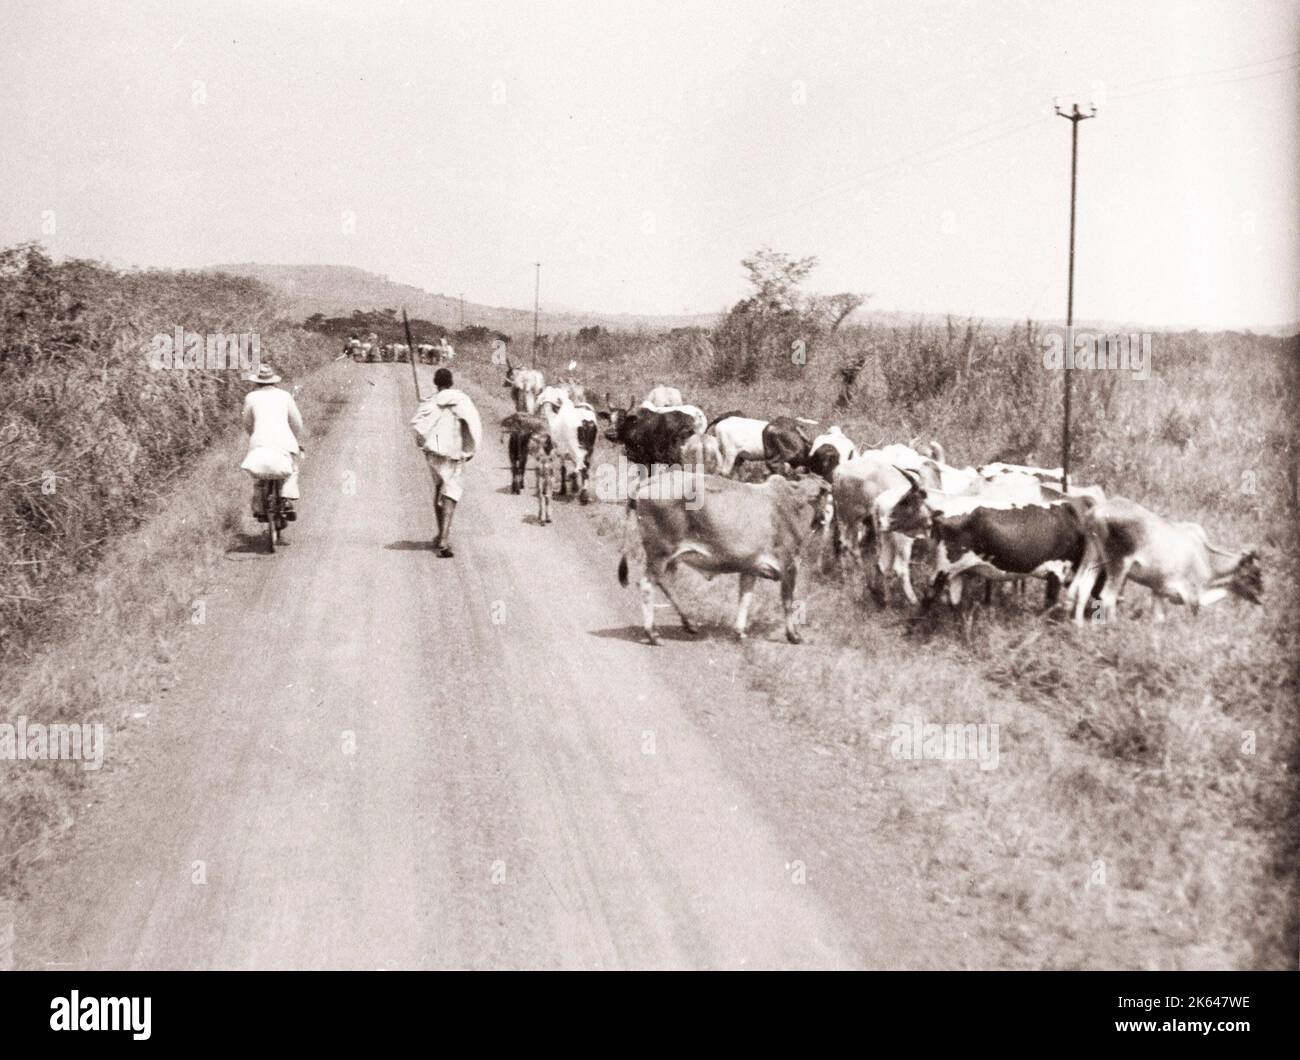 1940s East Africa - Uganda - rural transport and scenery, bicycle Photograph by a British army recruitment officer stationed in East Africa and the Middle East during World War II Stock Photo